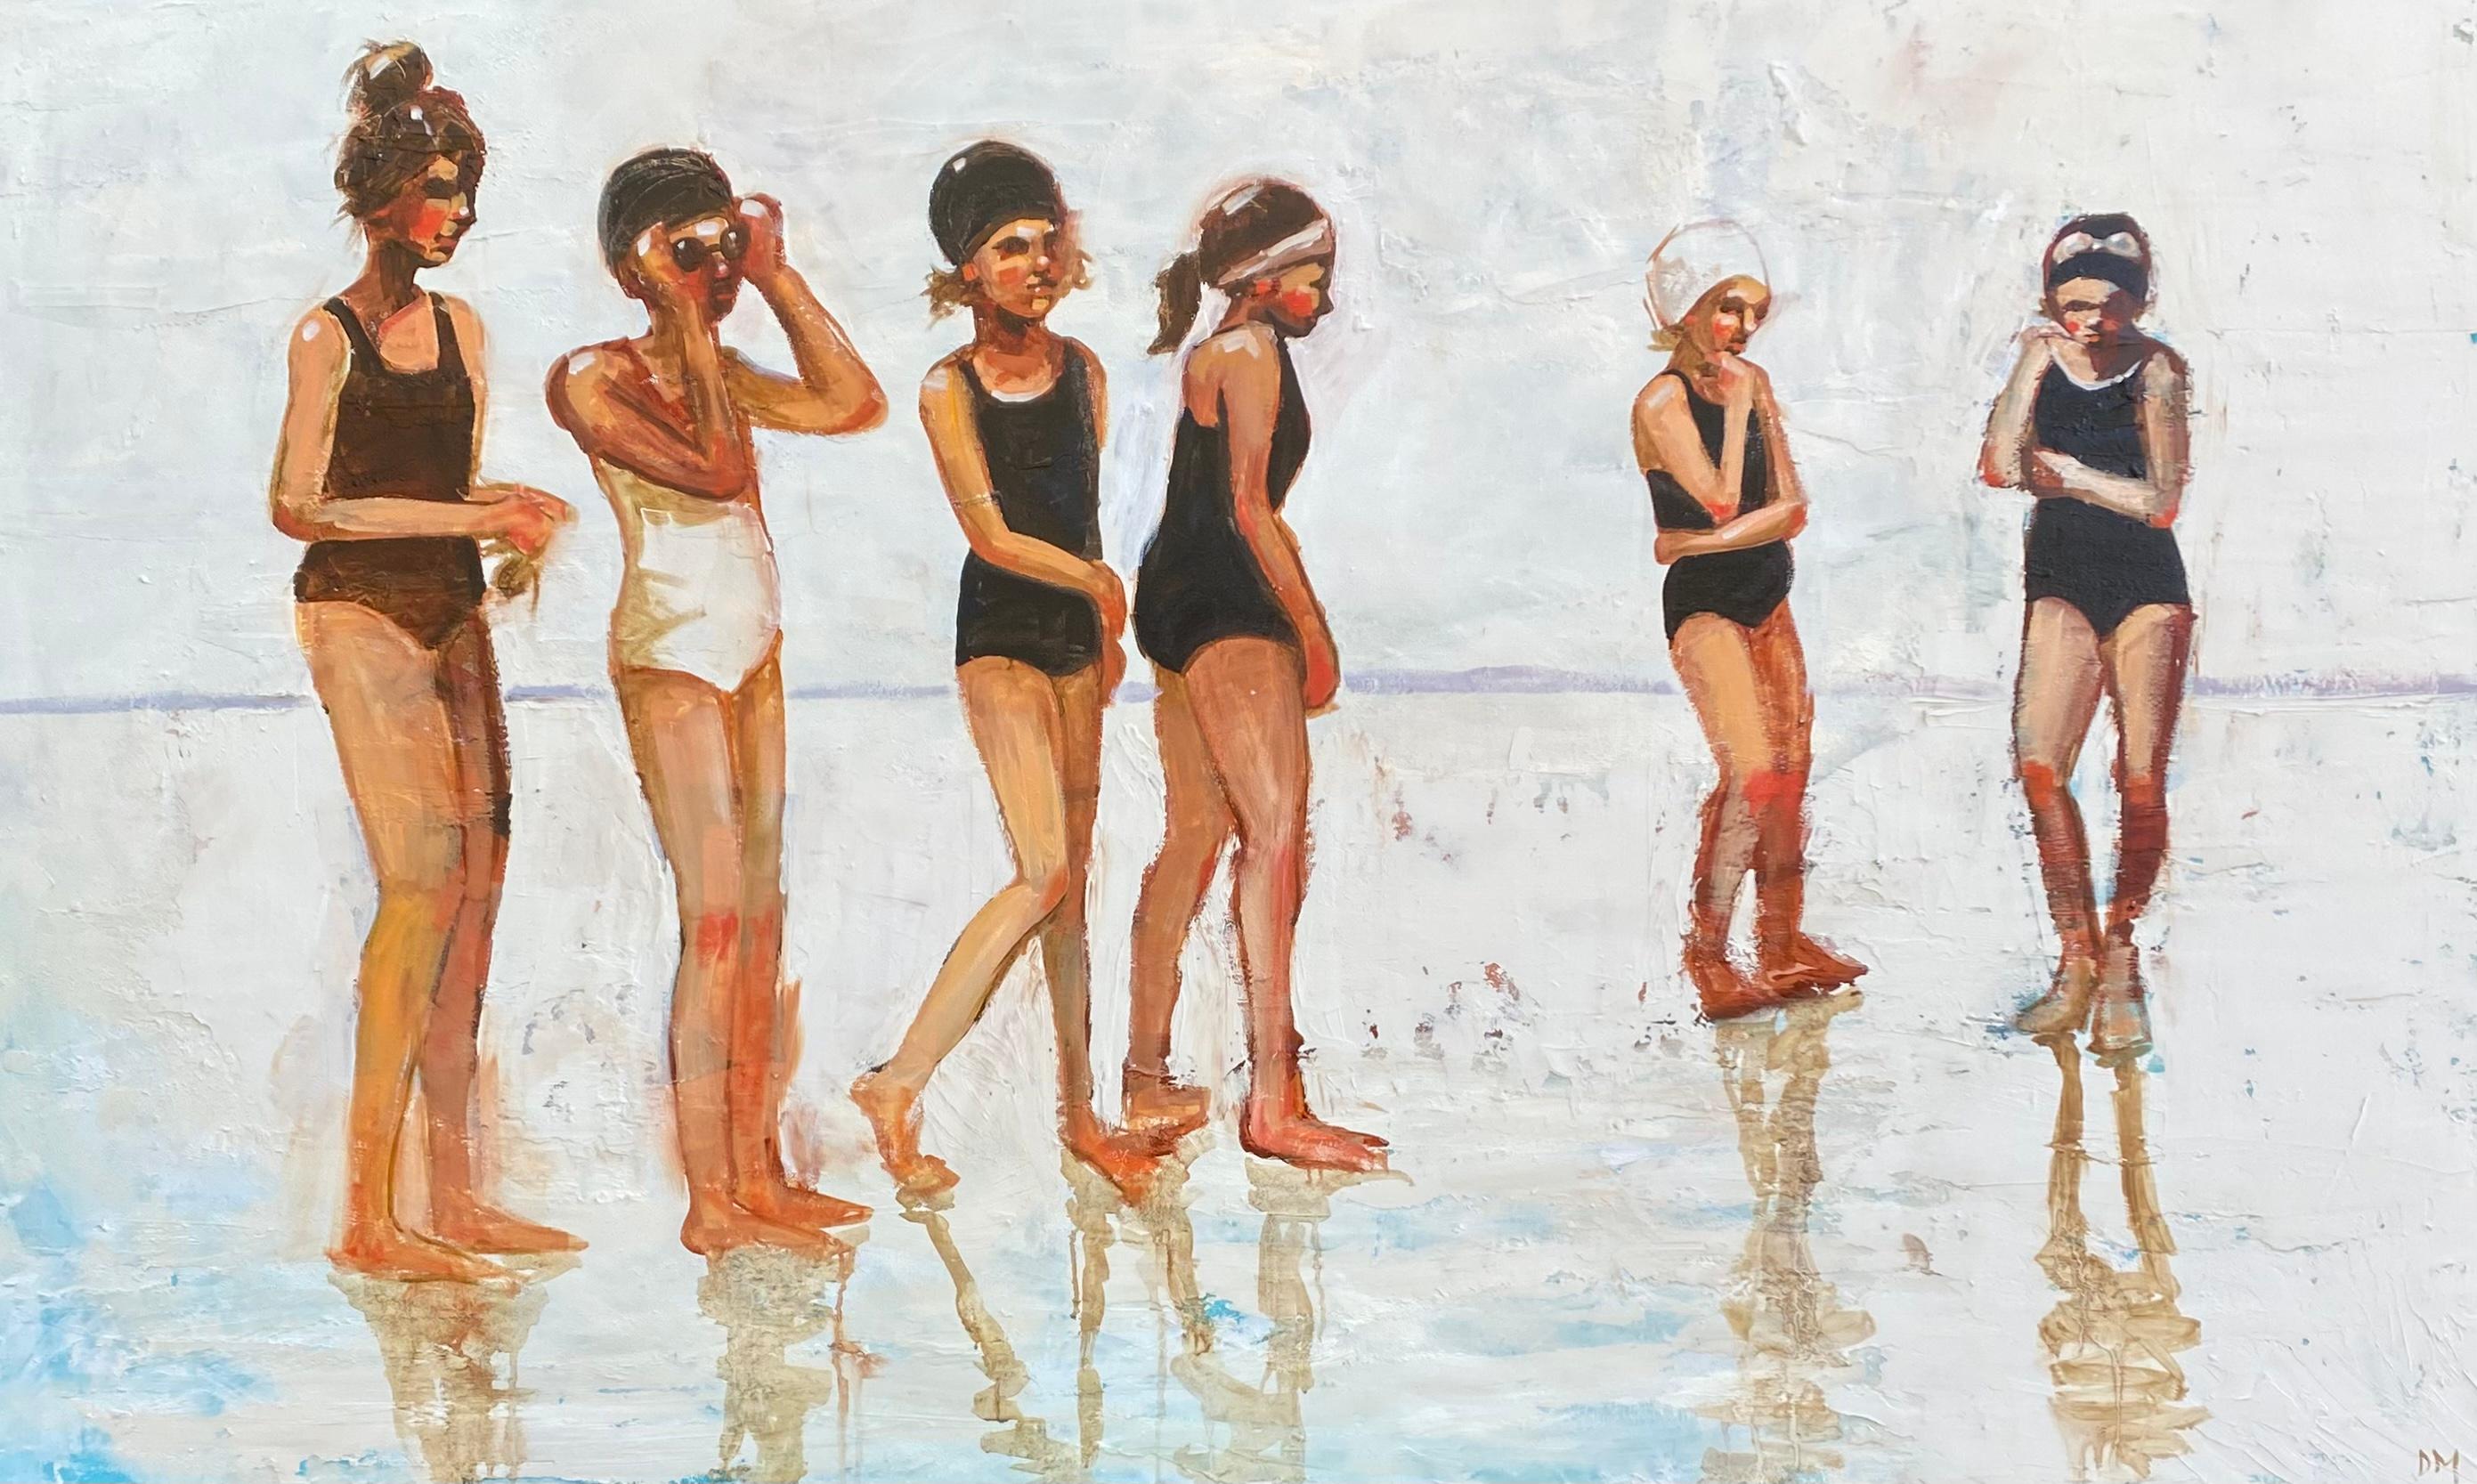 "Swim Line" Six girls wearing bathing suits and caps lined up on the ocean